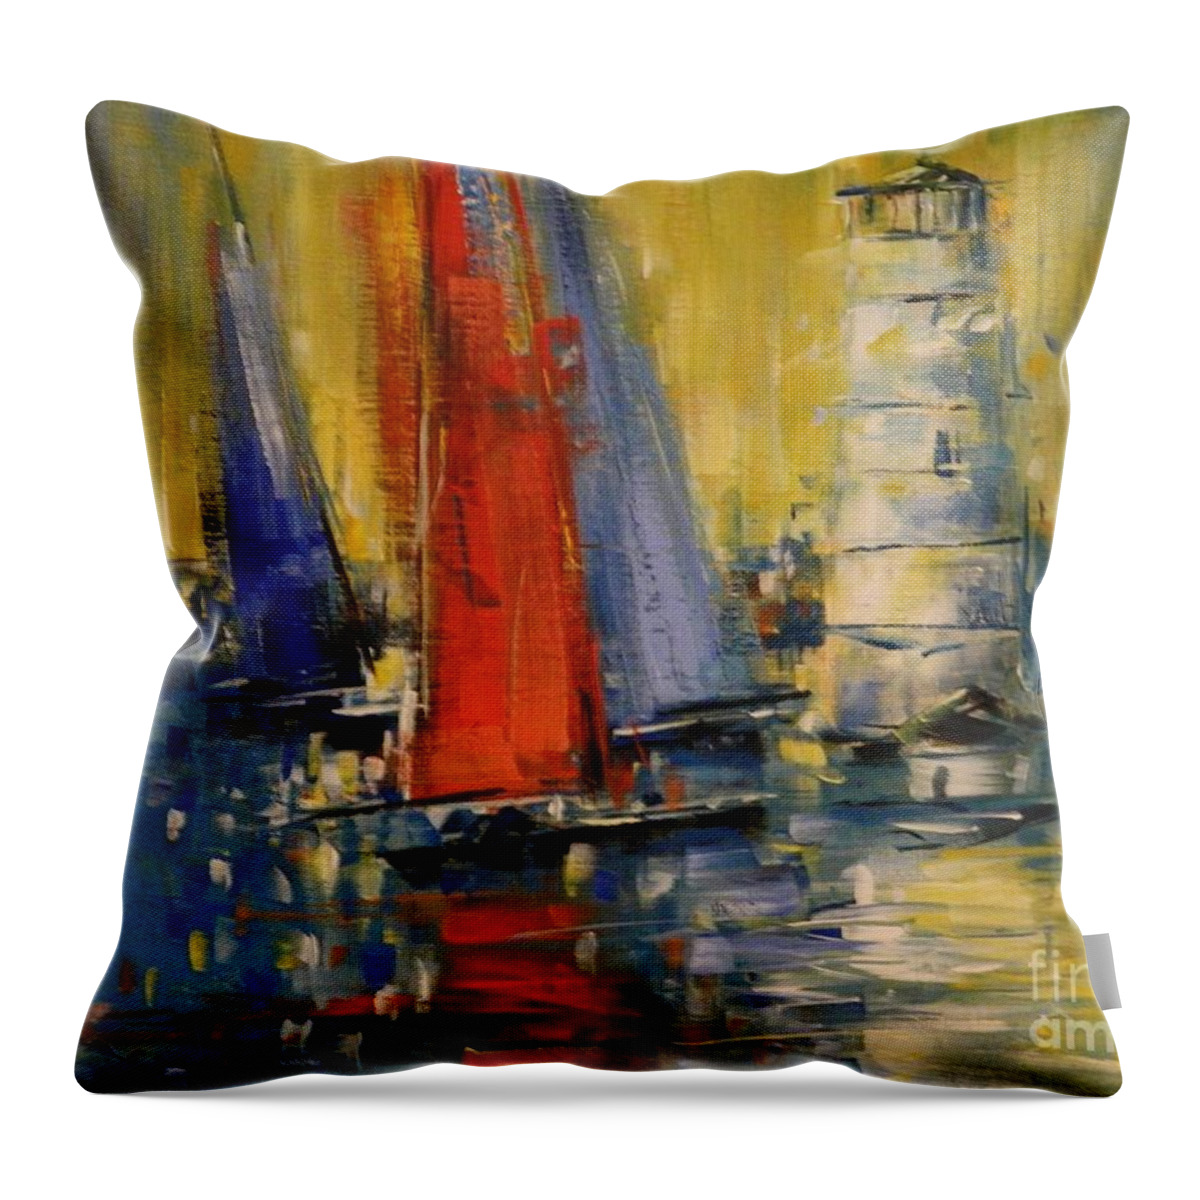 Boston Throw Pillow featuring the painting Boston Light by Dan Campbell